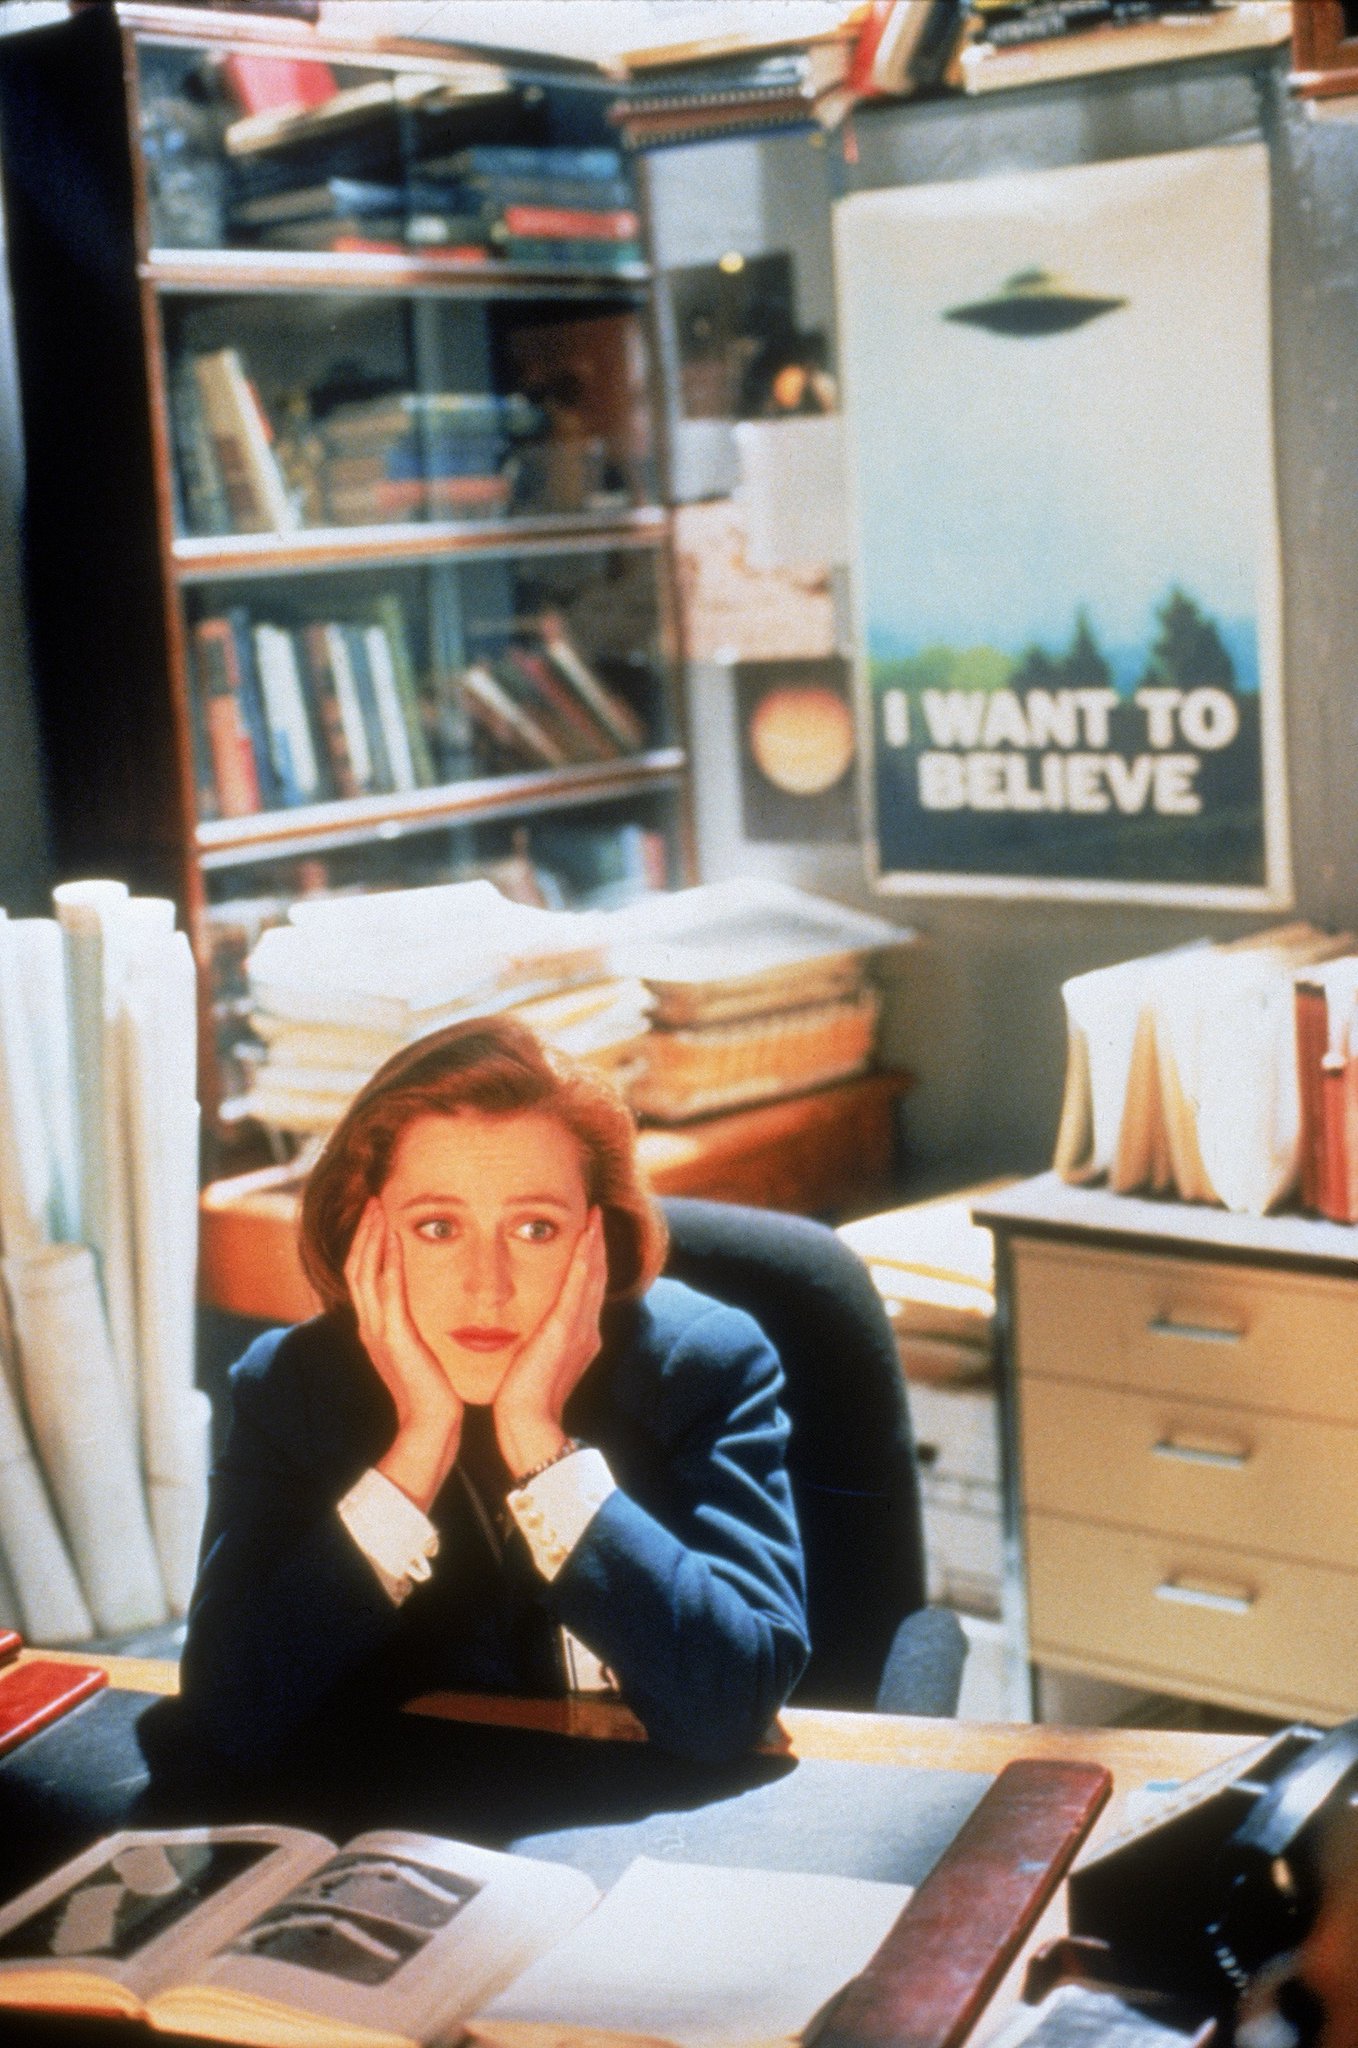 Believing can be tiring ...

HL wishes a VERY Happy Birthday to Gillian Anderson! (Martyn) 